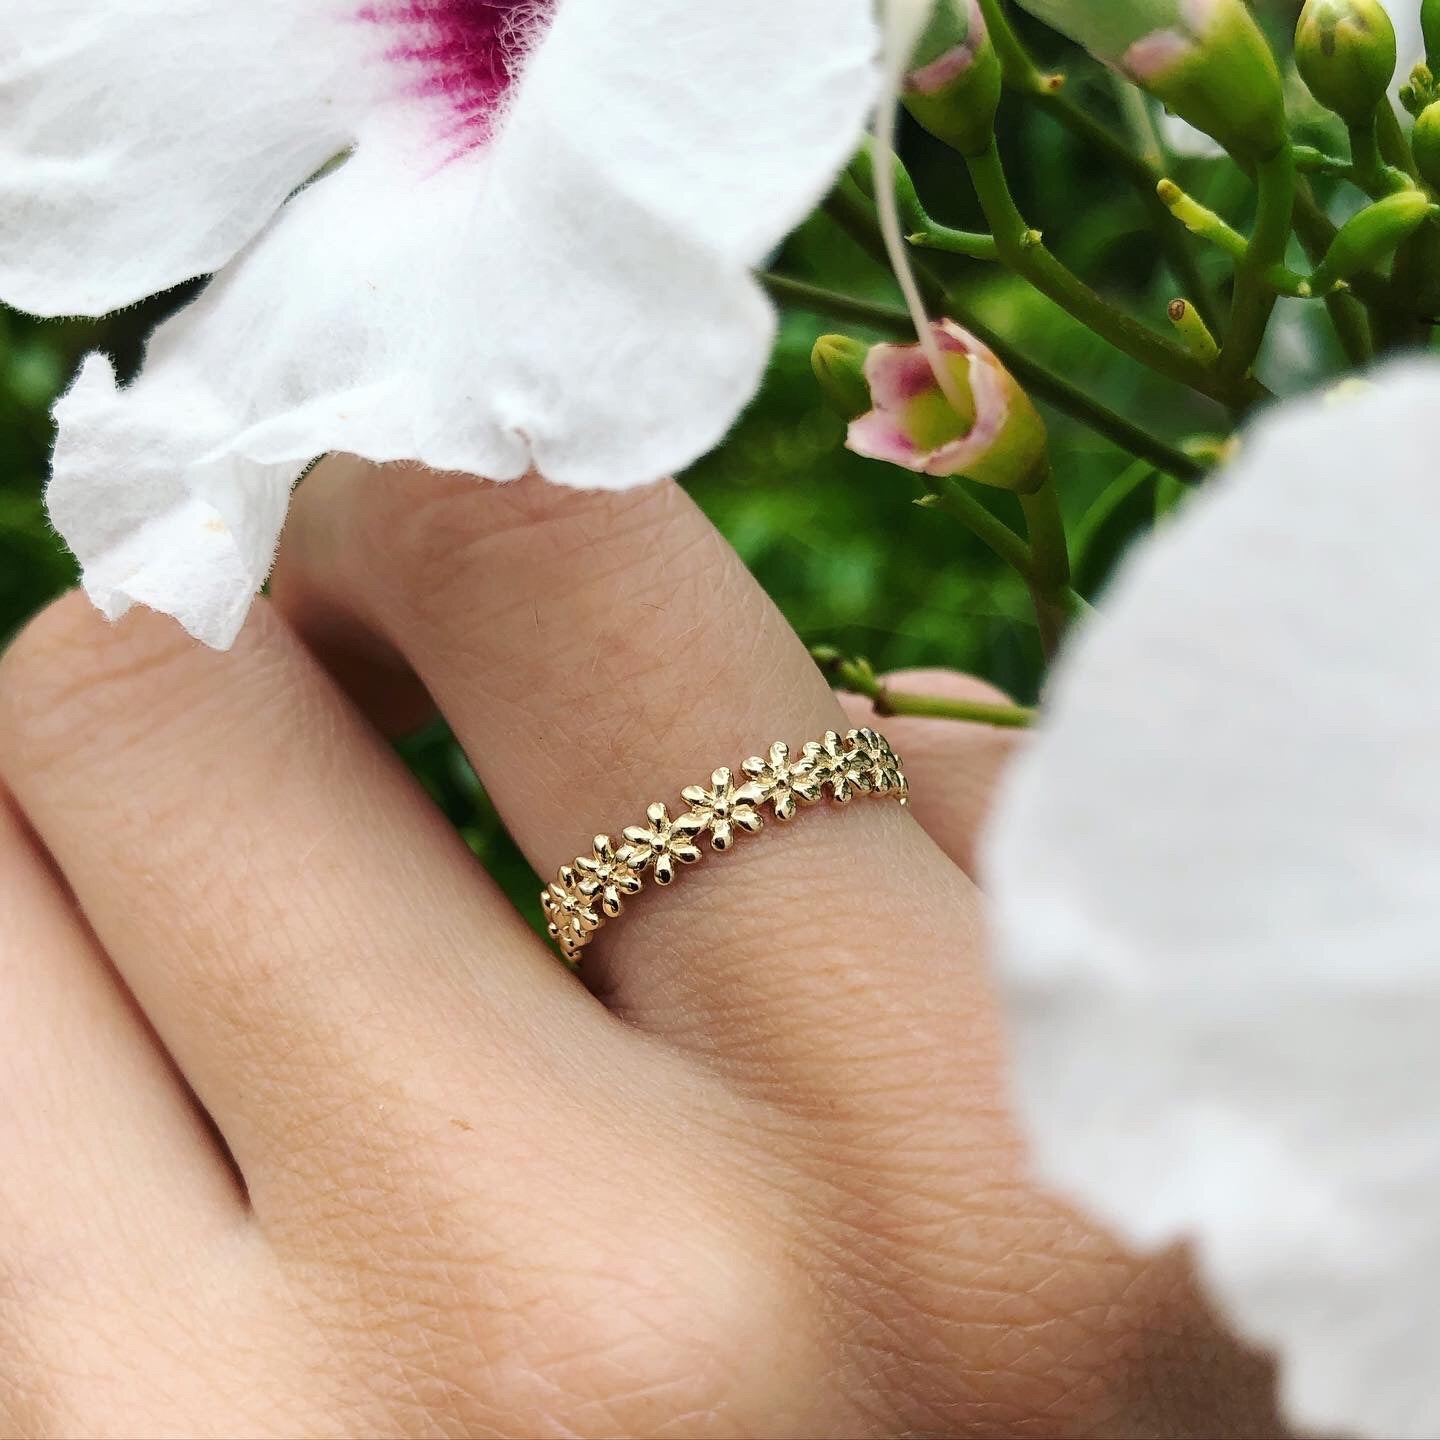 Solid gold ring with flower motif, shown on hand